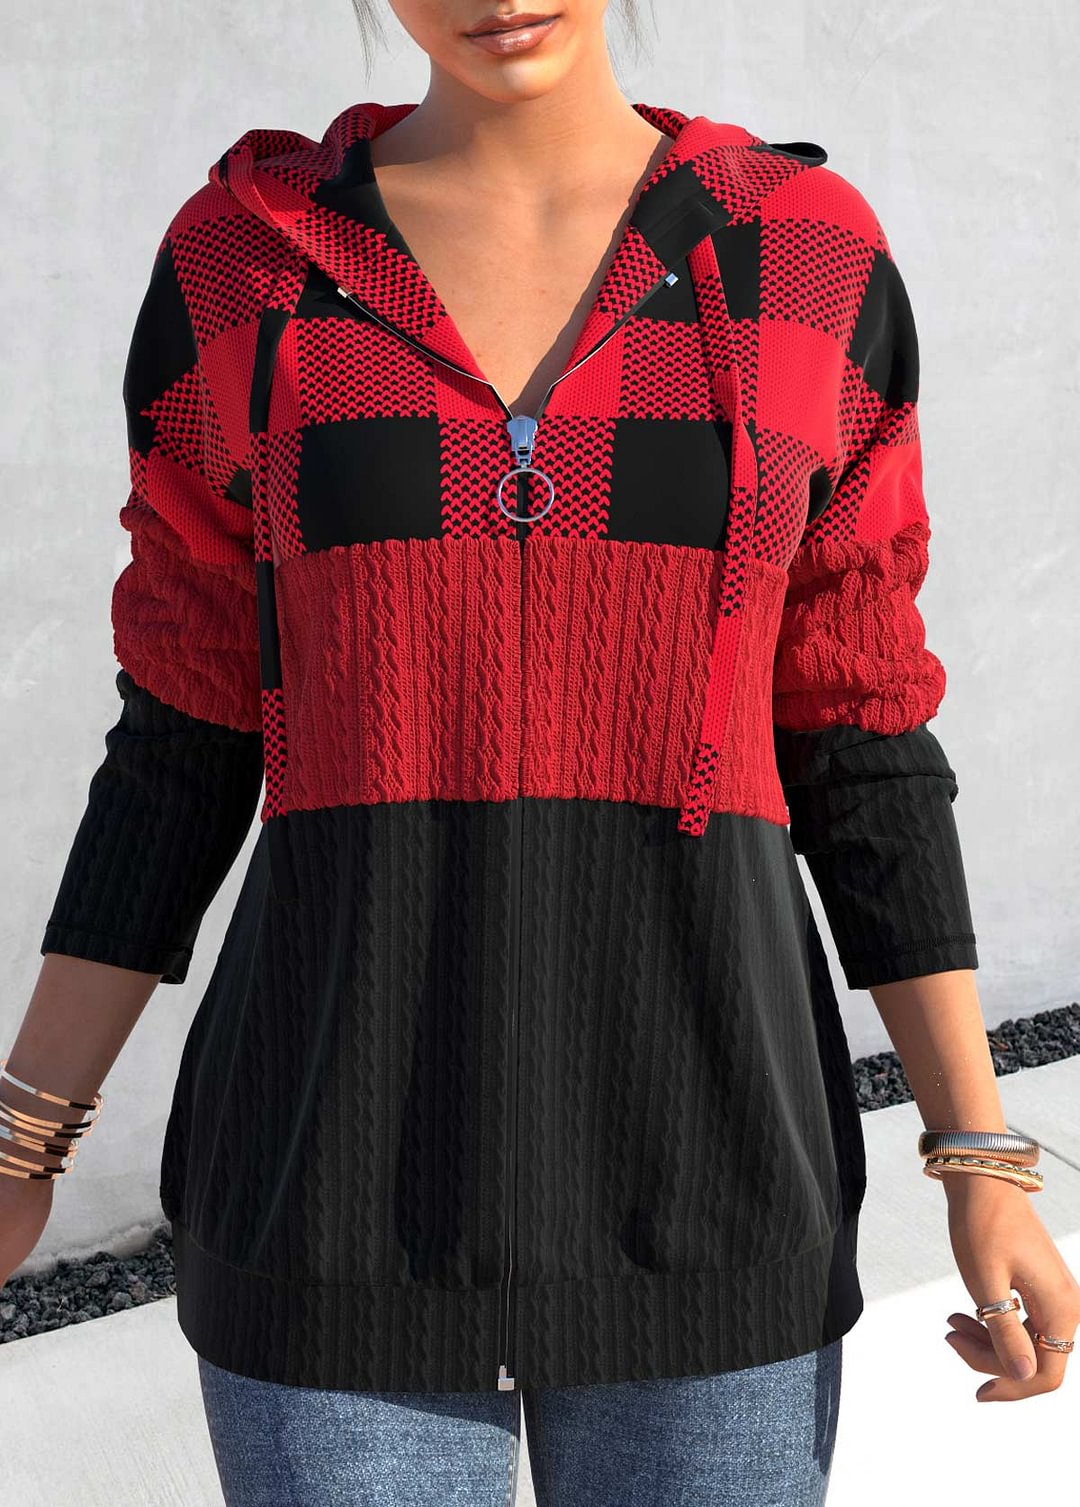 Black And Red Check Colorblock Casual  Women's Hoodie